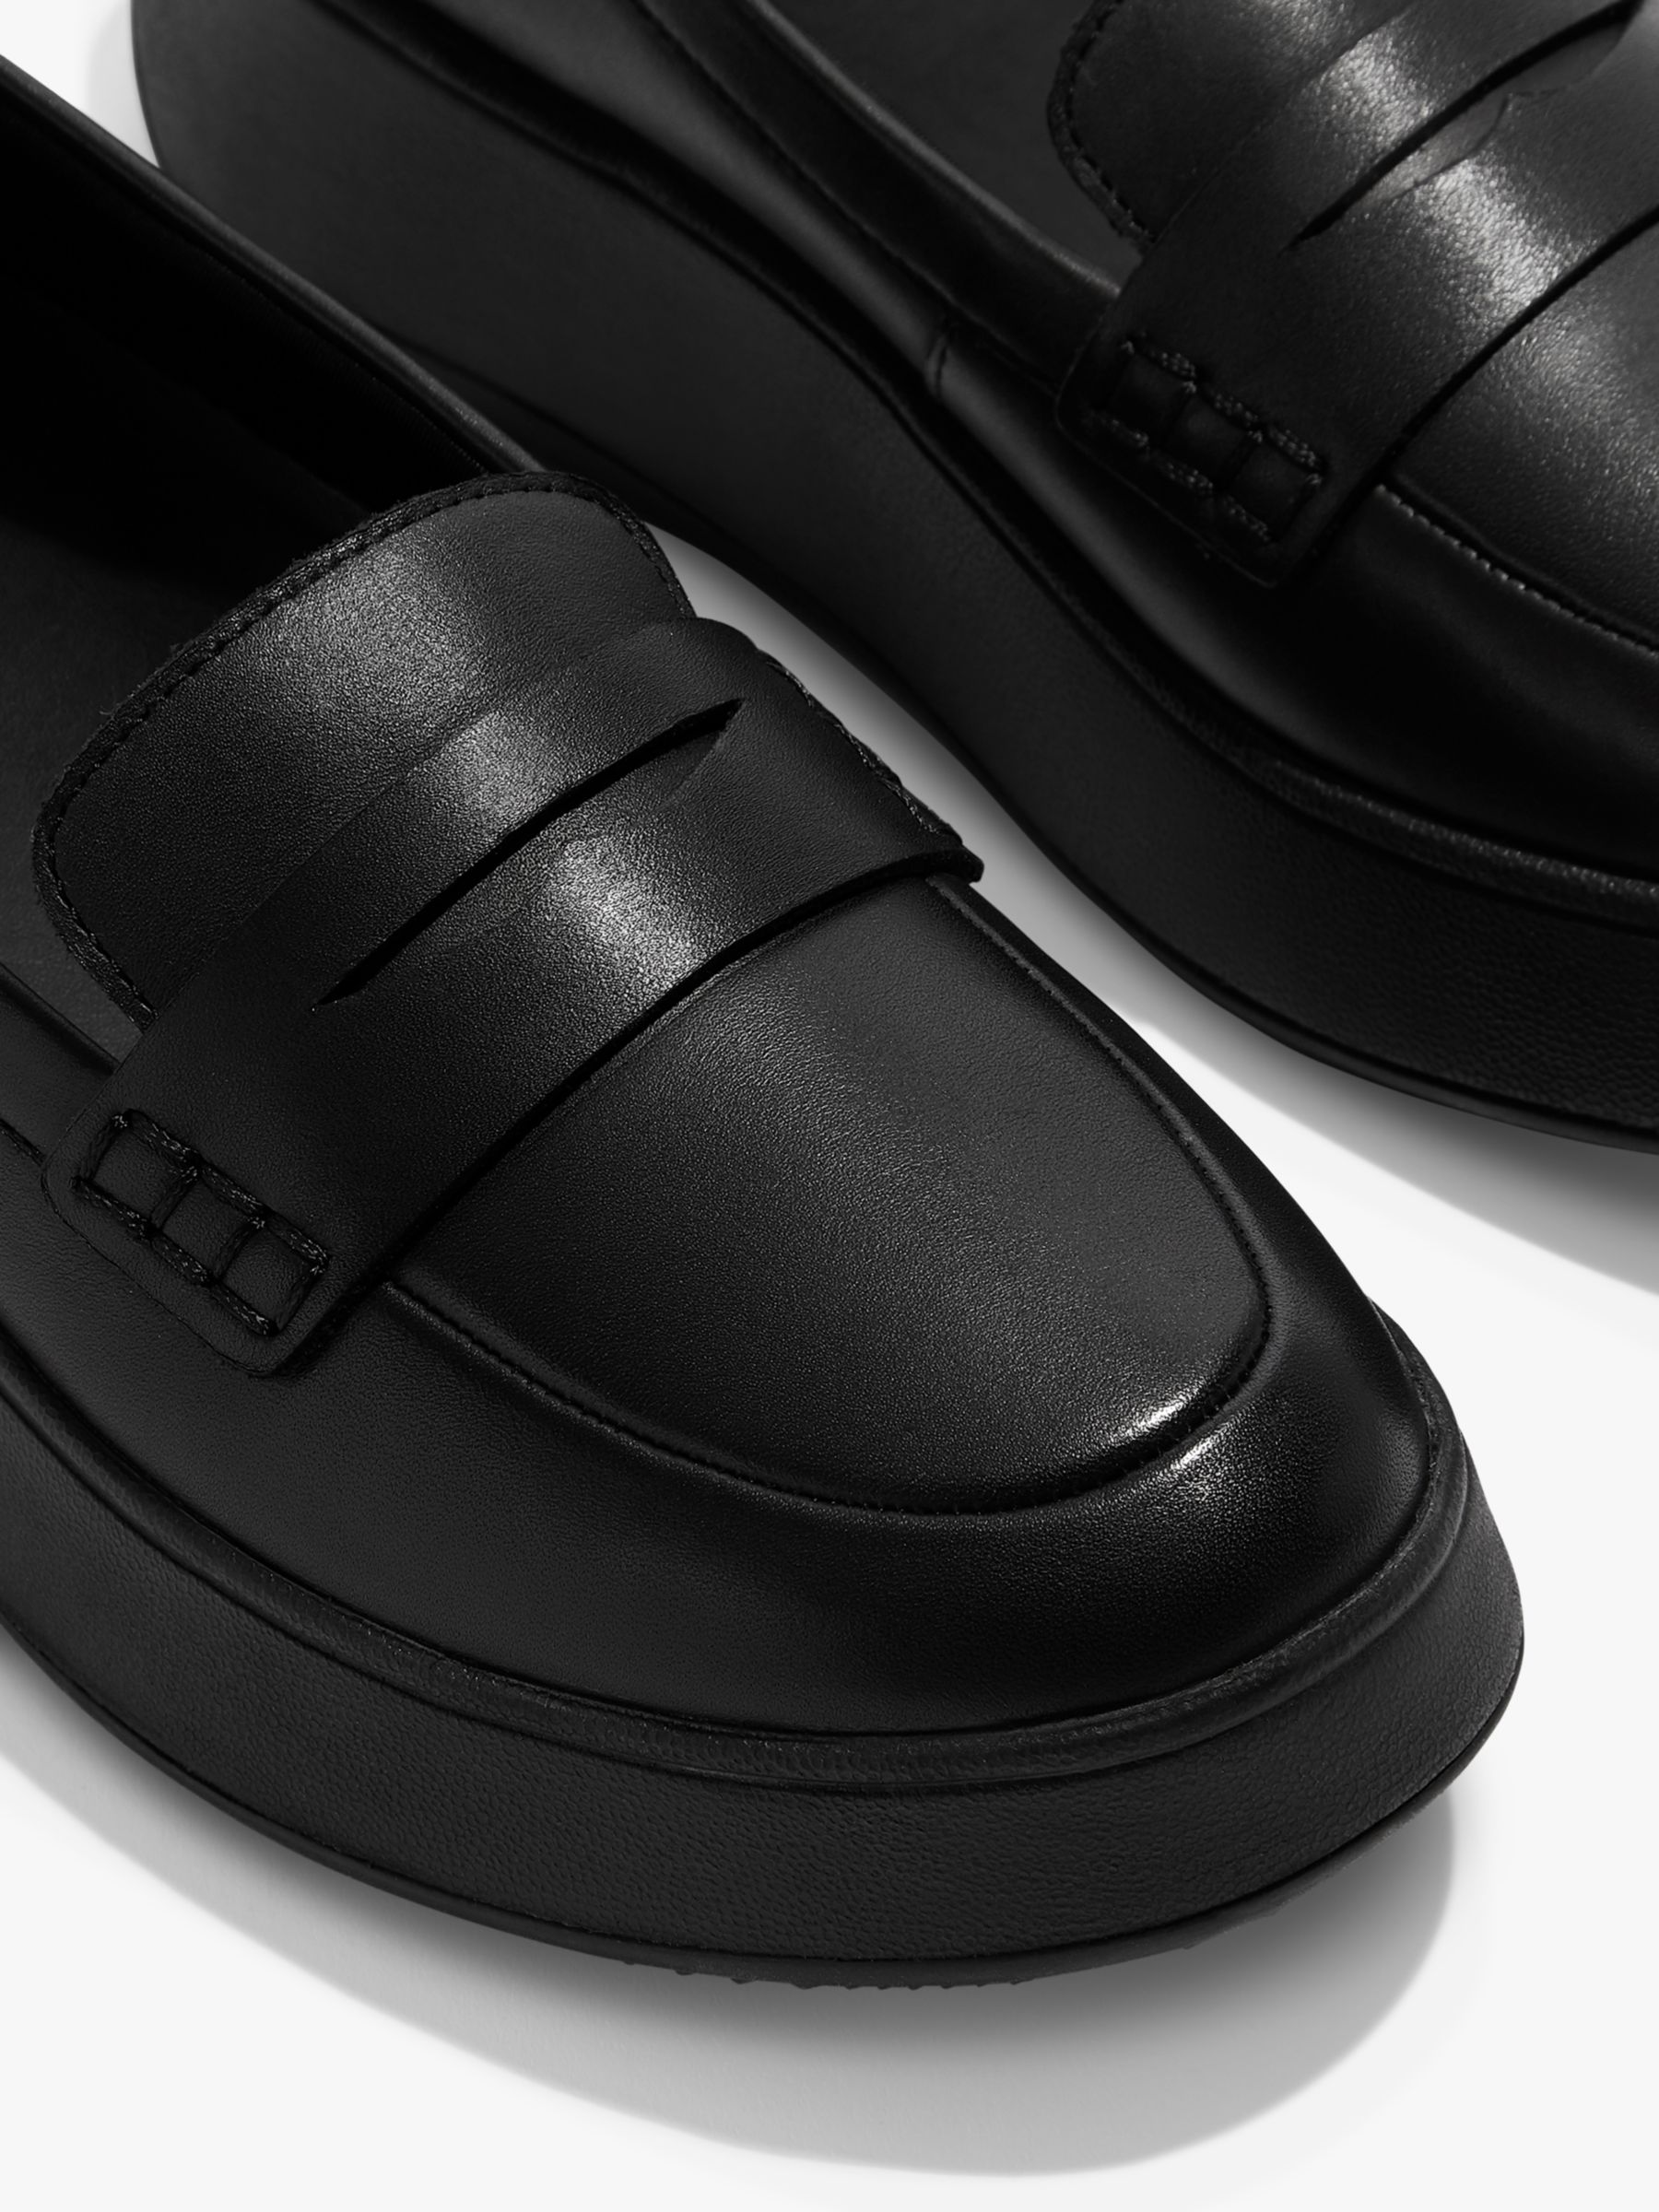 FitFlop Flatform Leather Loafers, Black at John Lewis & Partners